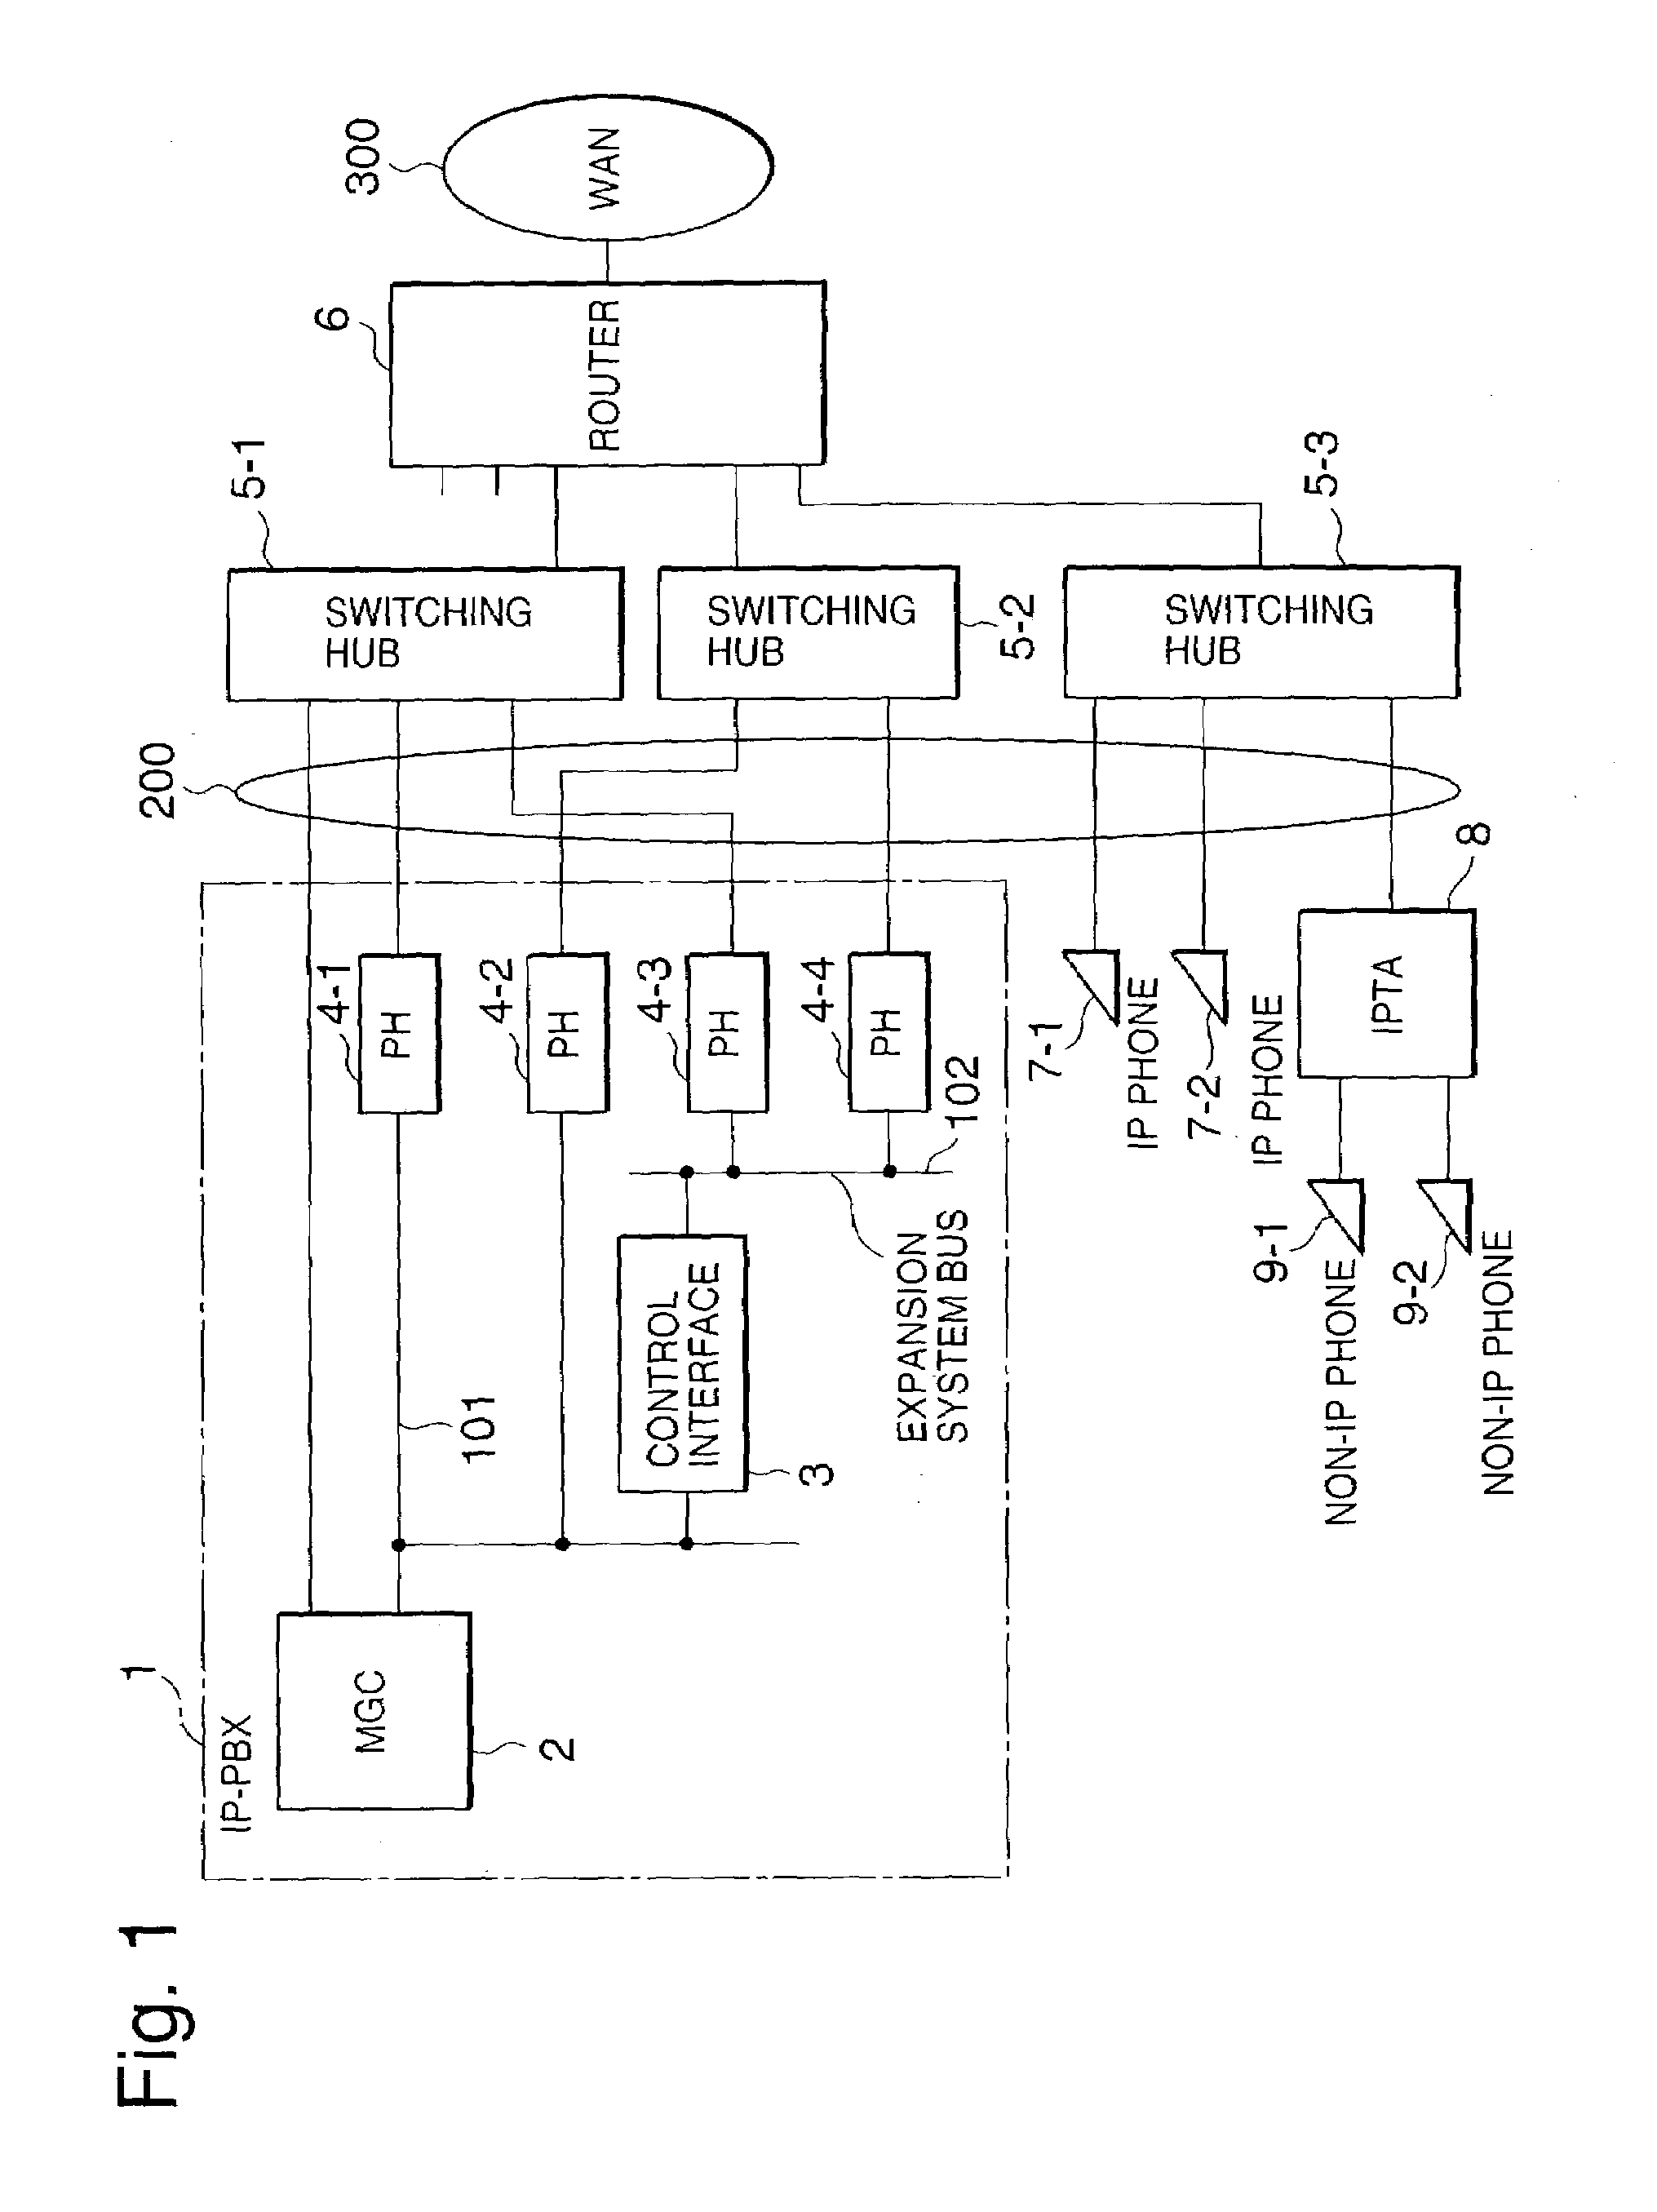 Internet protocol compliant private branch electronic exchange and a method for redundantly configuring terminal interfaces